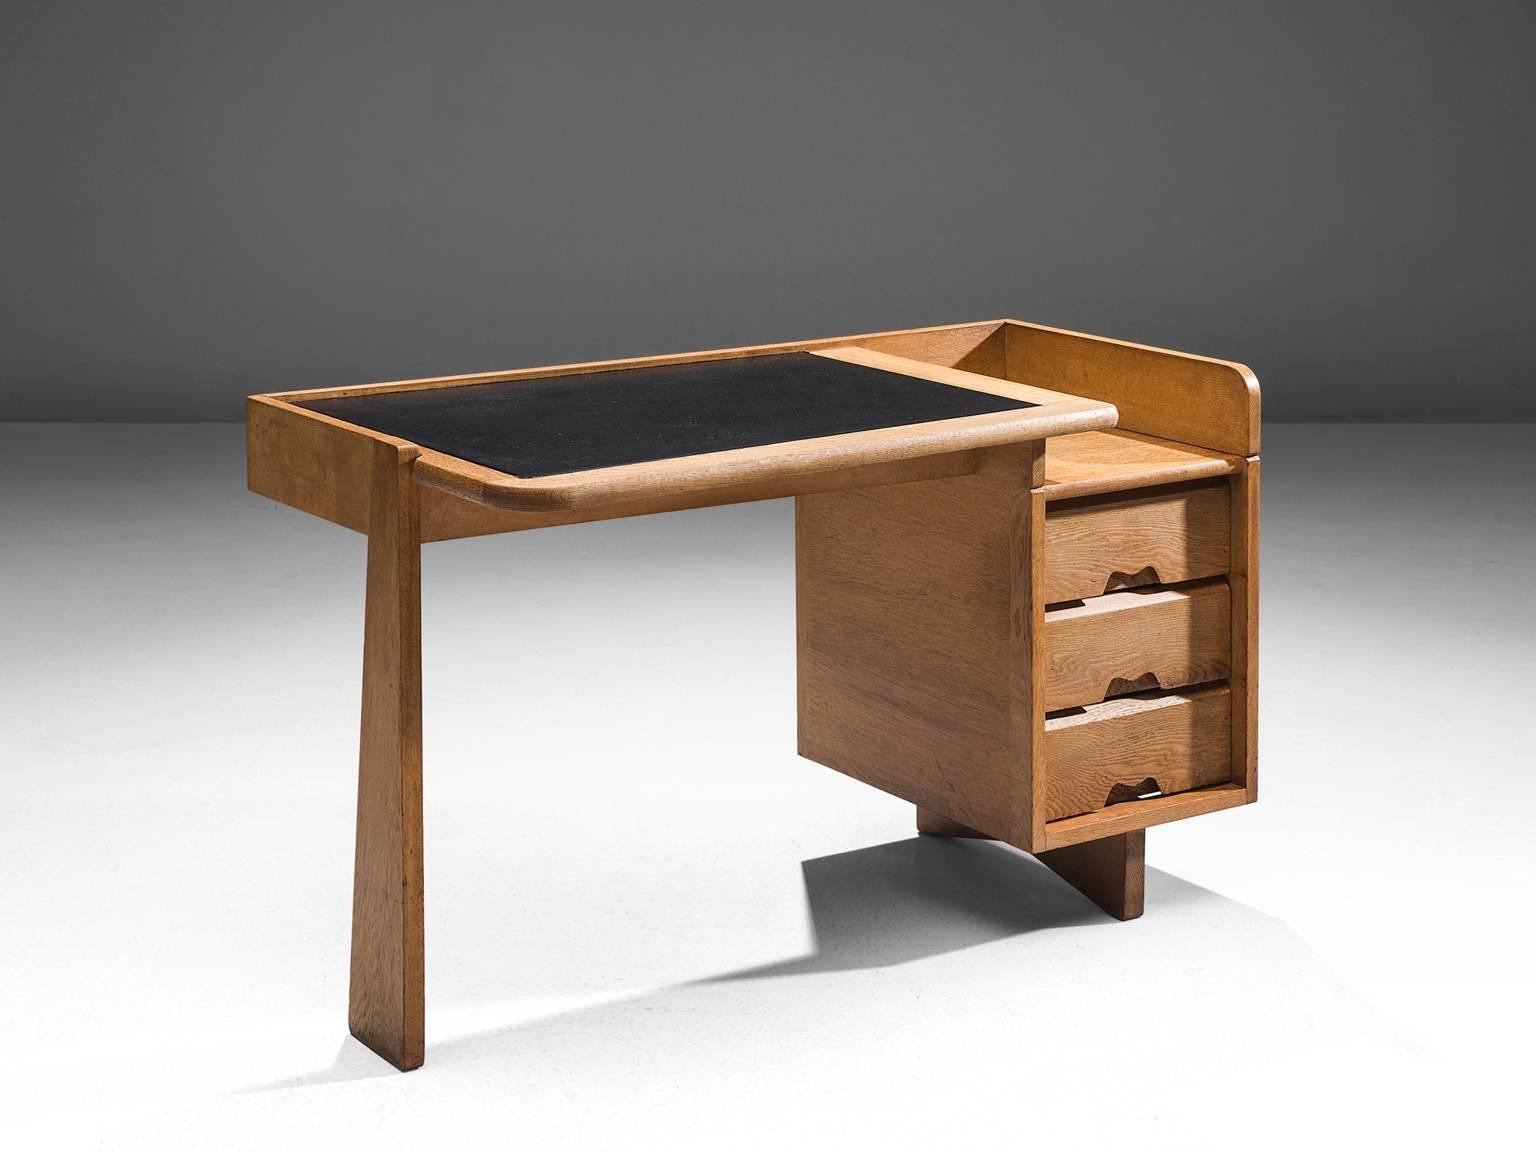 Guillerme et Chambron, desk, oak and black leather, France, 1960s. 

This small desk is designed by the French designer duo Guillerme and Chambron. This writing desk holds the characteristic decorations and lines of this duo such as the decorative